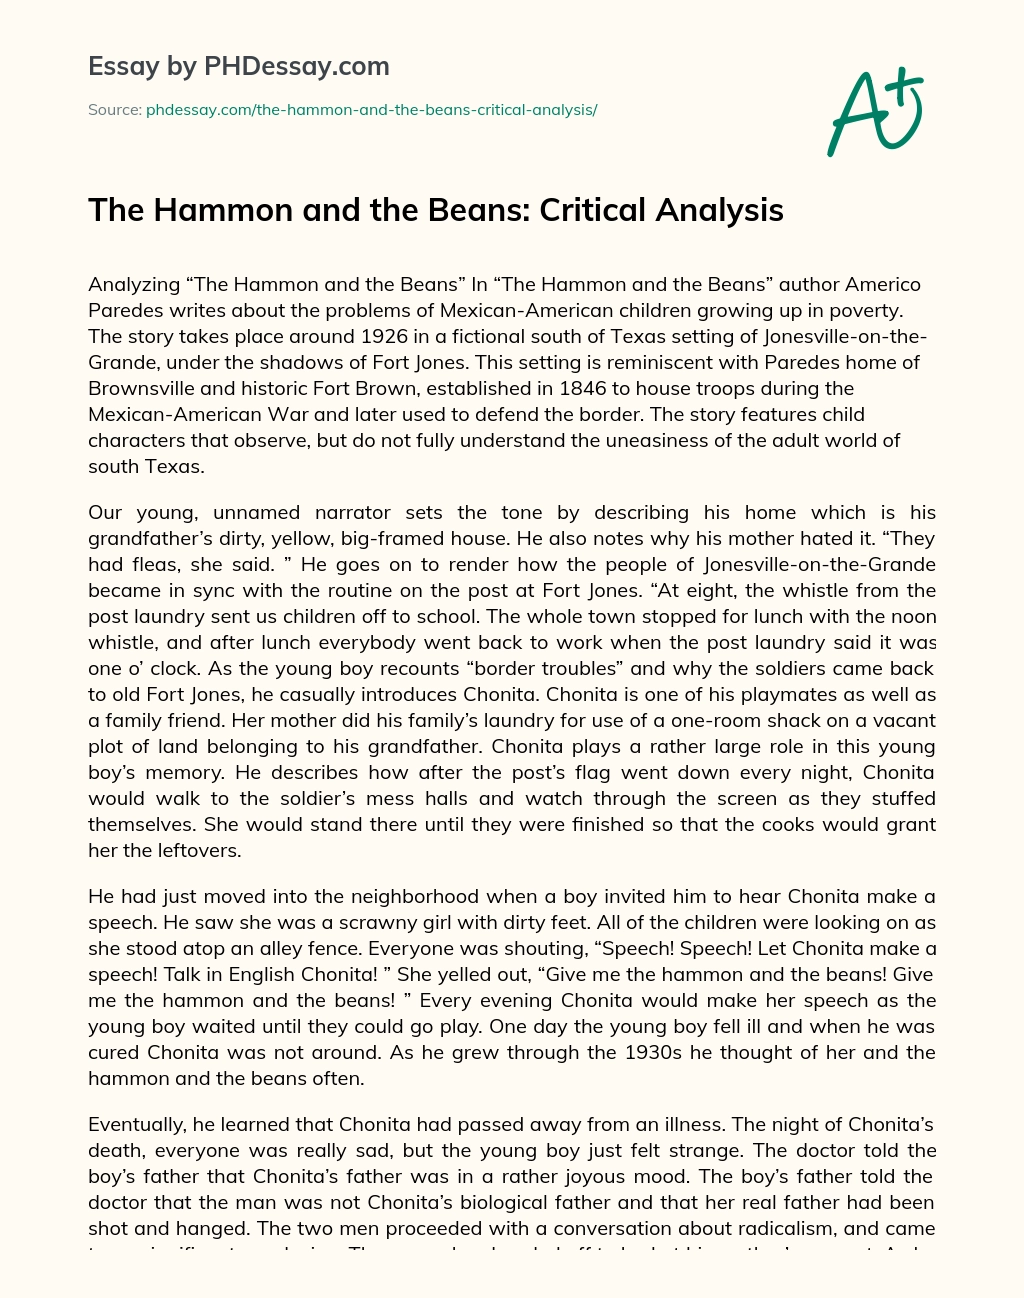 The Hammon and the Beans: Critical Analysis essay